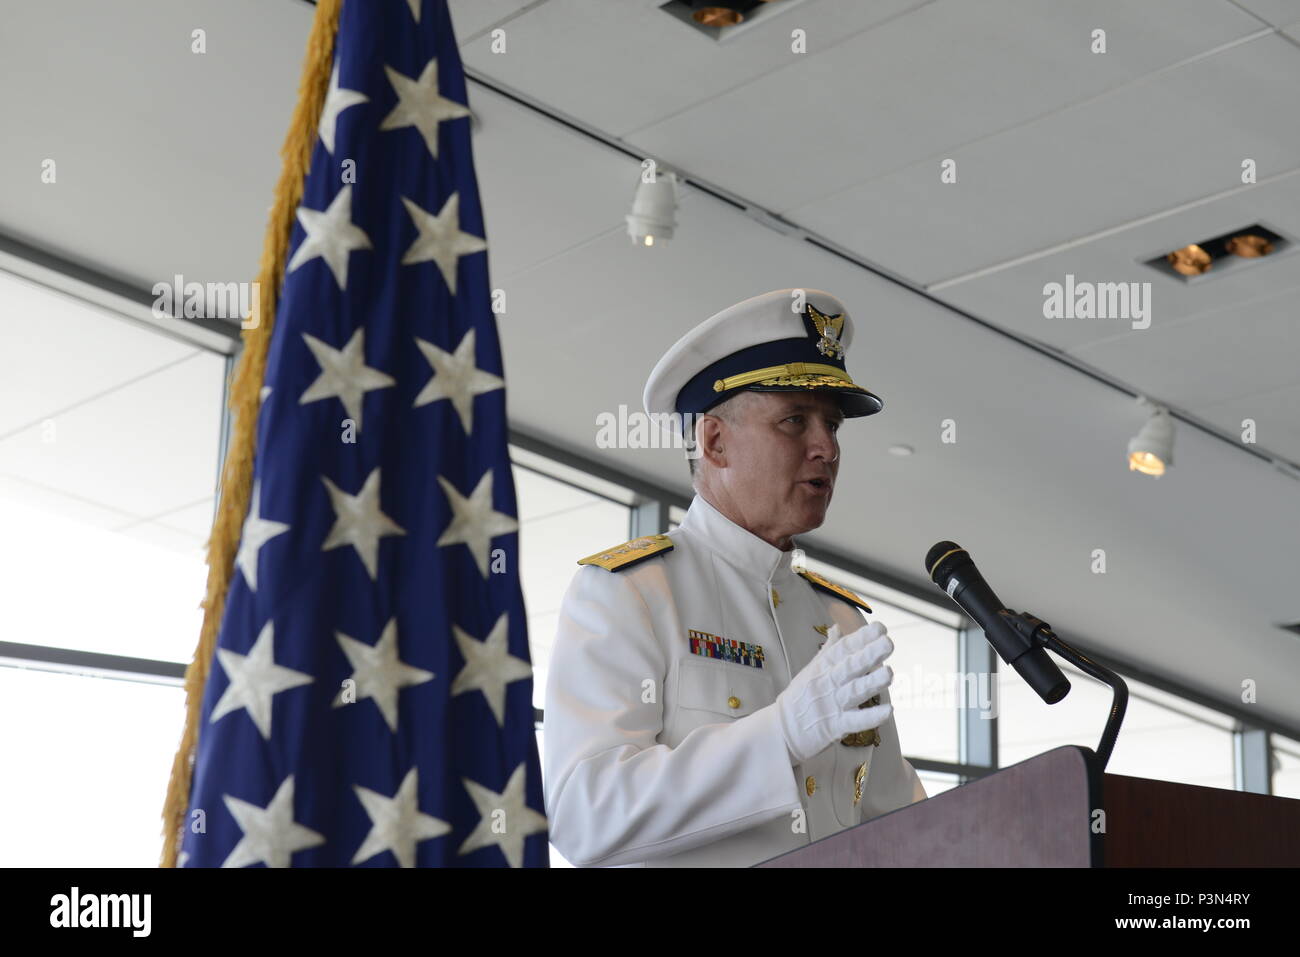 Rear Adm. David R. Callahan, Commander of the Eighth Coast Guard District, addresses attendees during the Coast Guard Sector Ohio Valley official change-of-command ceremony Friday at the Muhammed Ali Center, Louisville, Kentucky. During the ceremony, Capt. Michael B. Zamperini assumed command of Sector Ohio Valley from Capt. Richard V. Timme. U.S. Coast Guard photo by Petty Officer 3rd Class Lora Ratliff Stock Photo